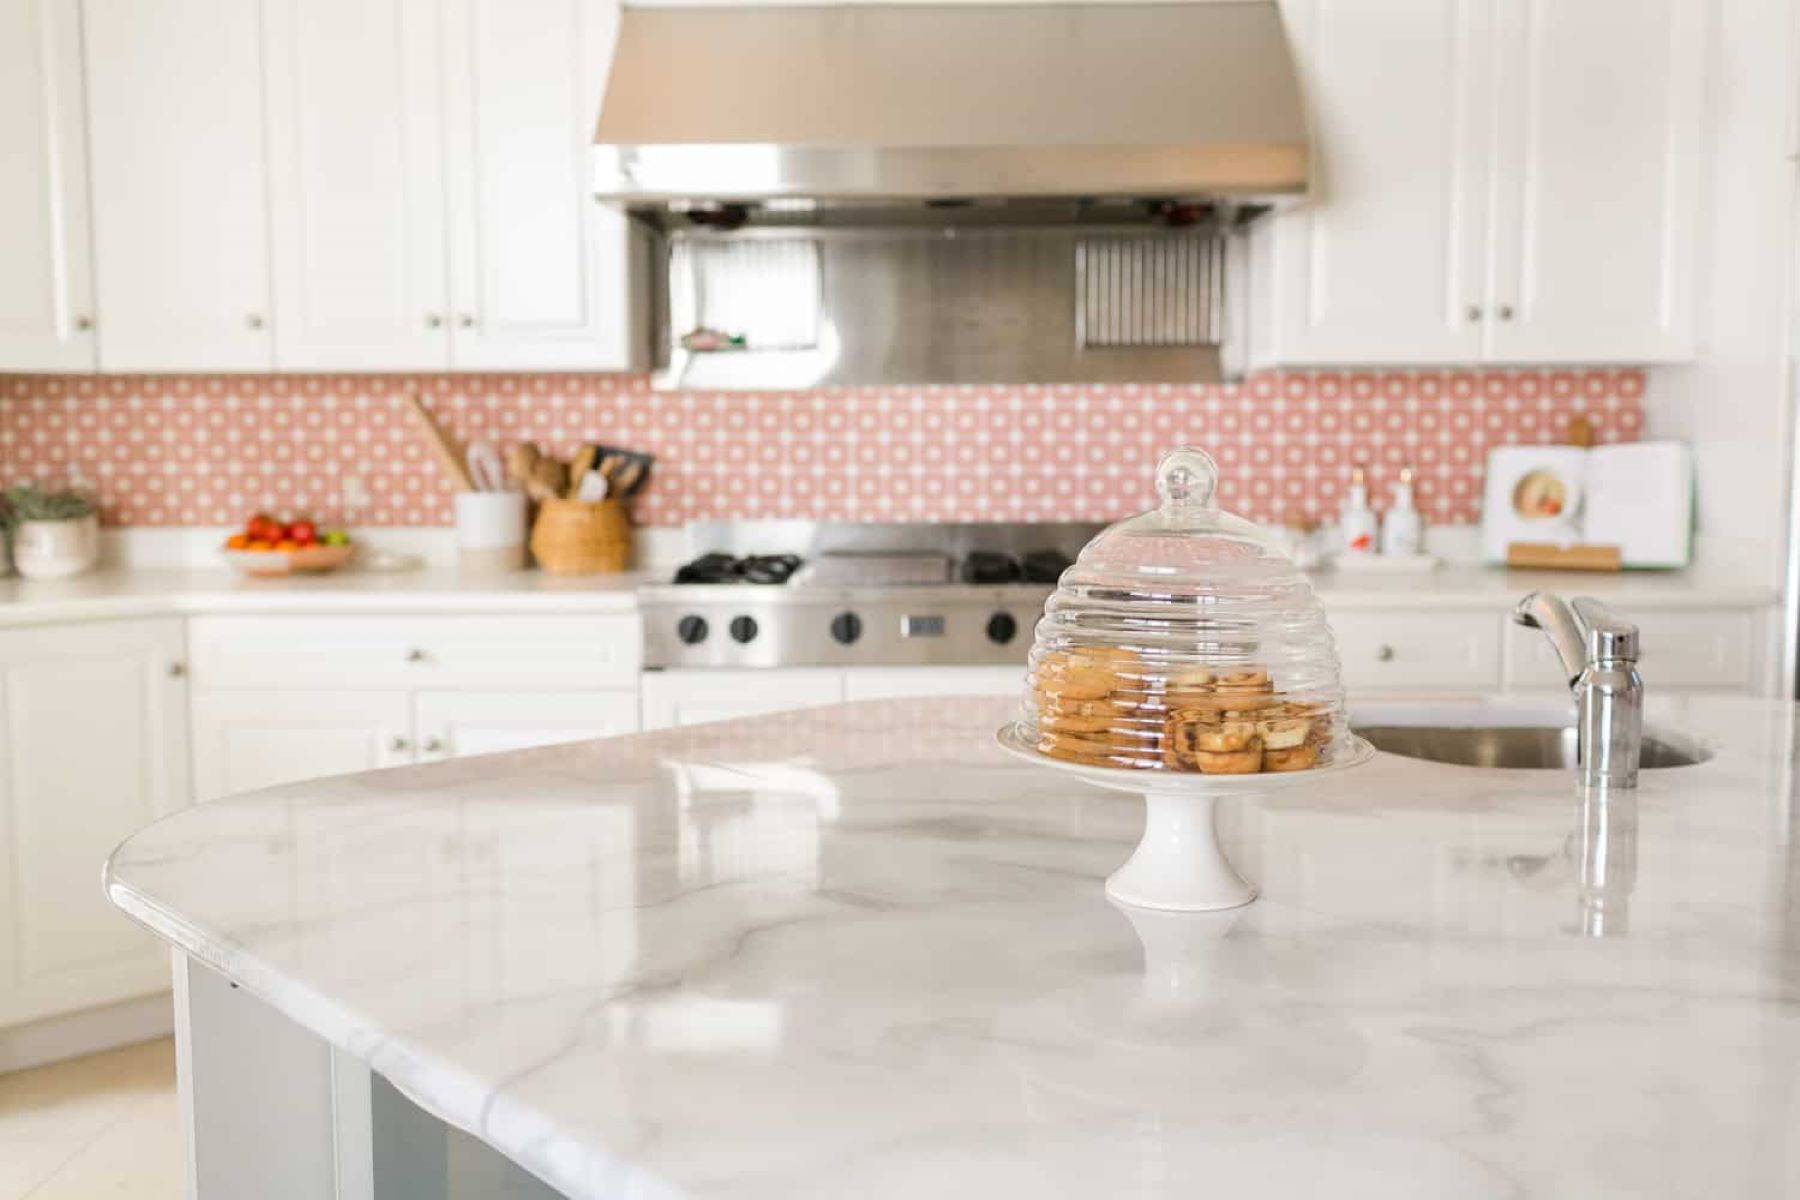 How To Paint Your Countertops To Look Like Marble